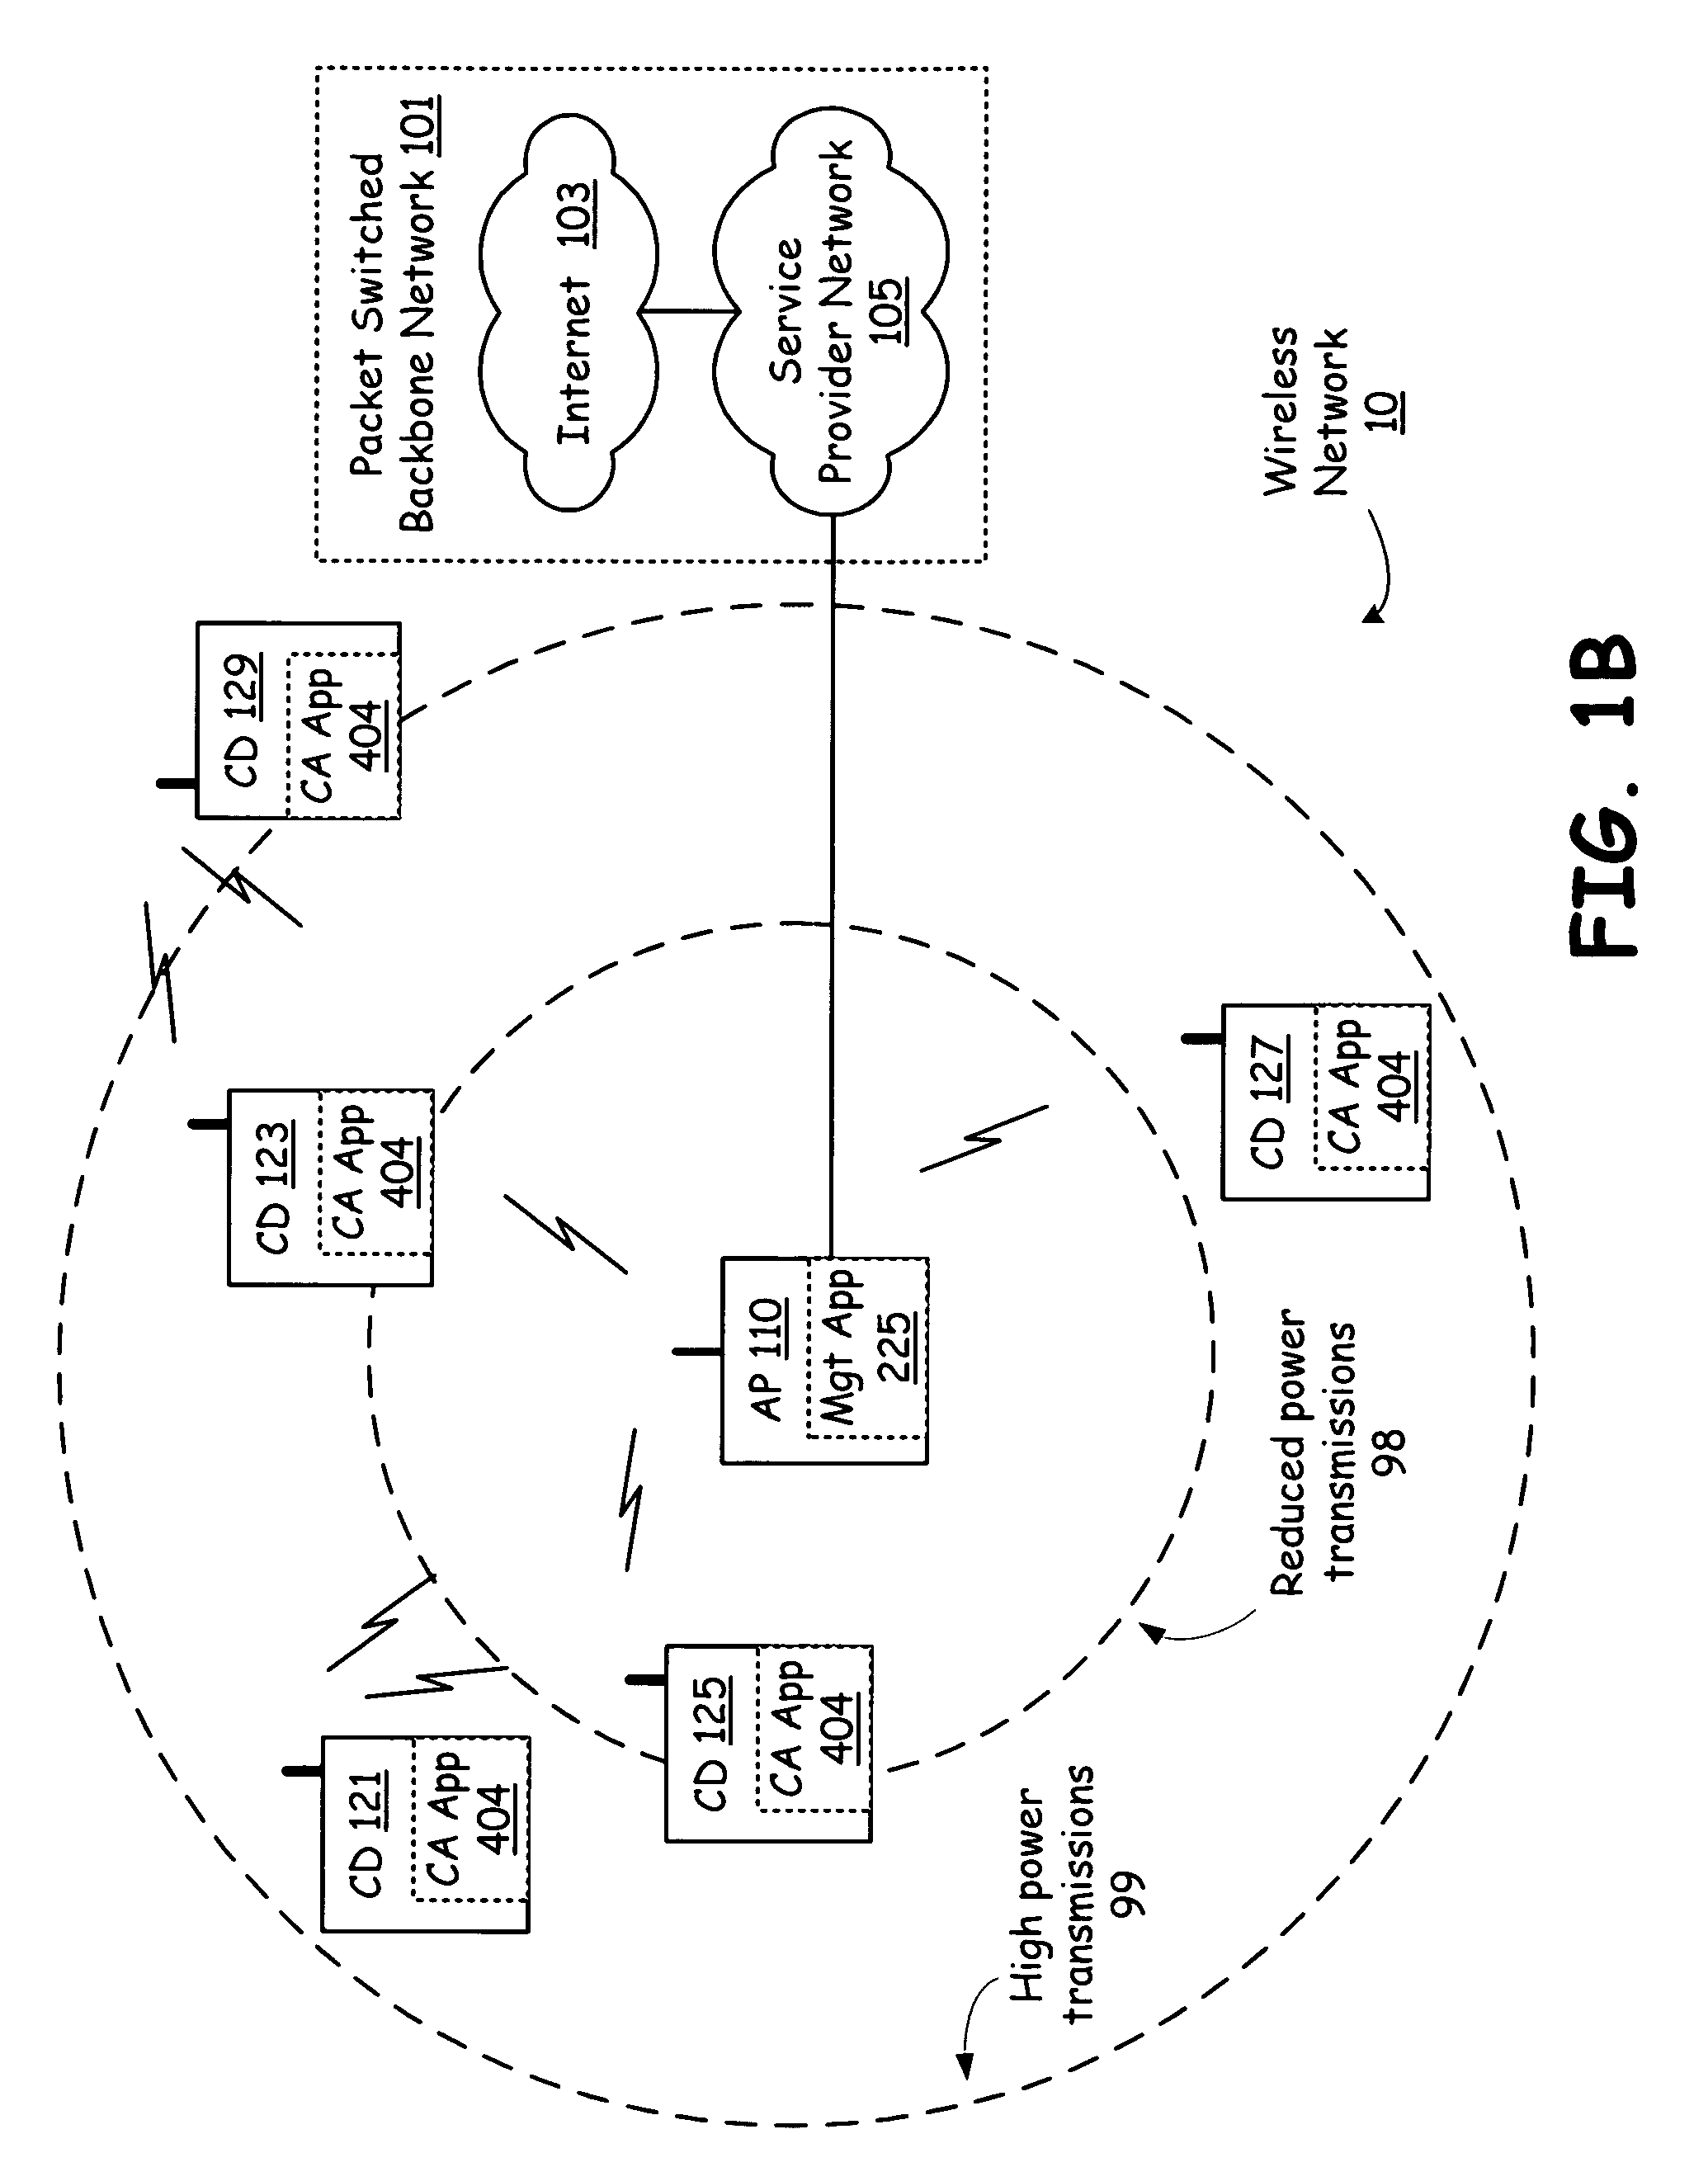 Cell network selectively applying proxy mode to minimize power